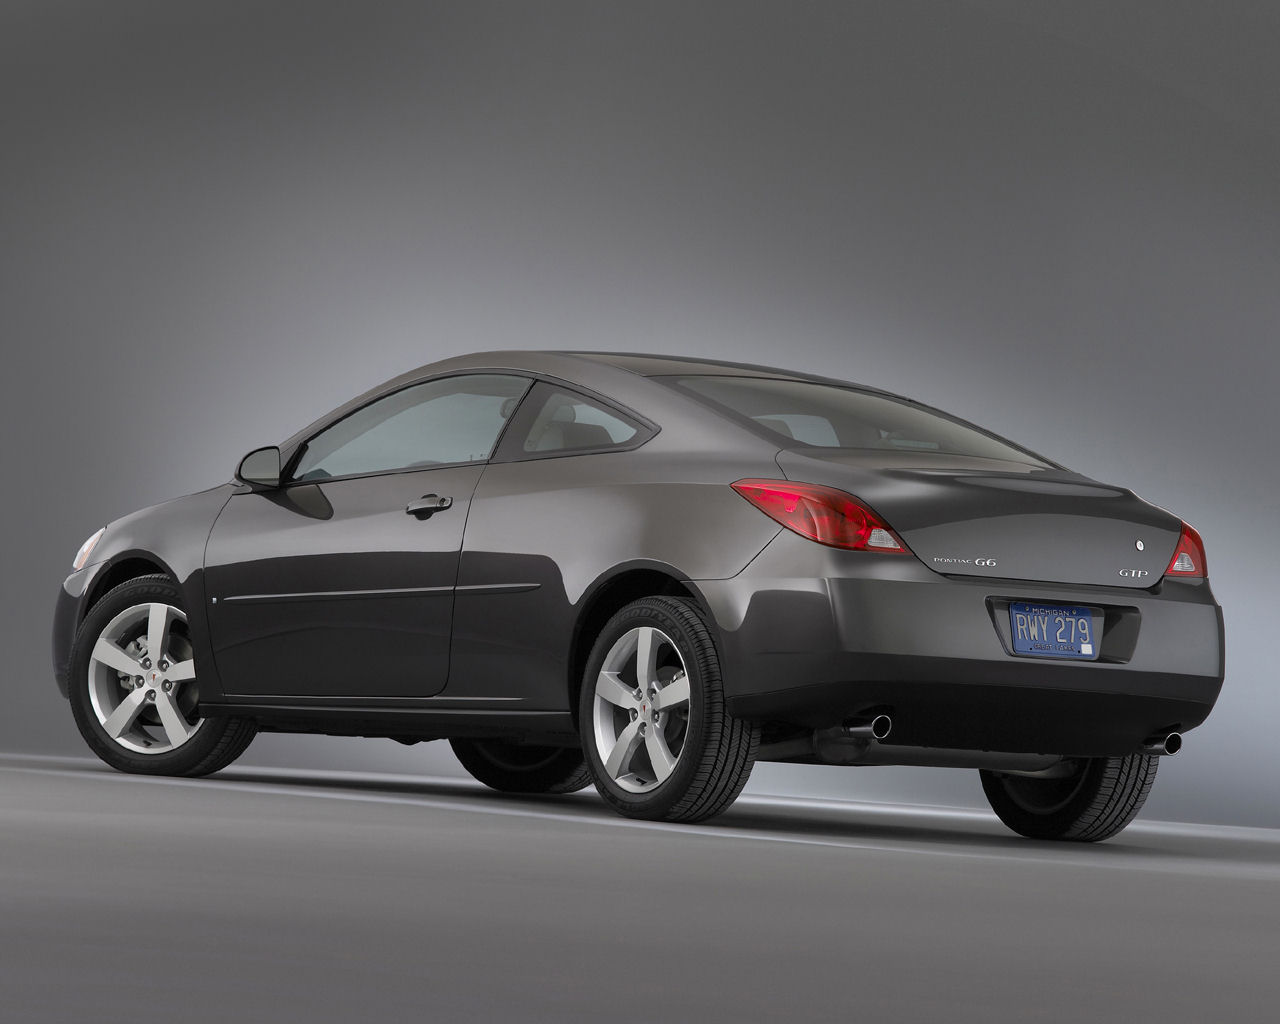 On The Pontiac G6 Wallpaper Below And Choose Set As Background